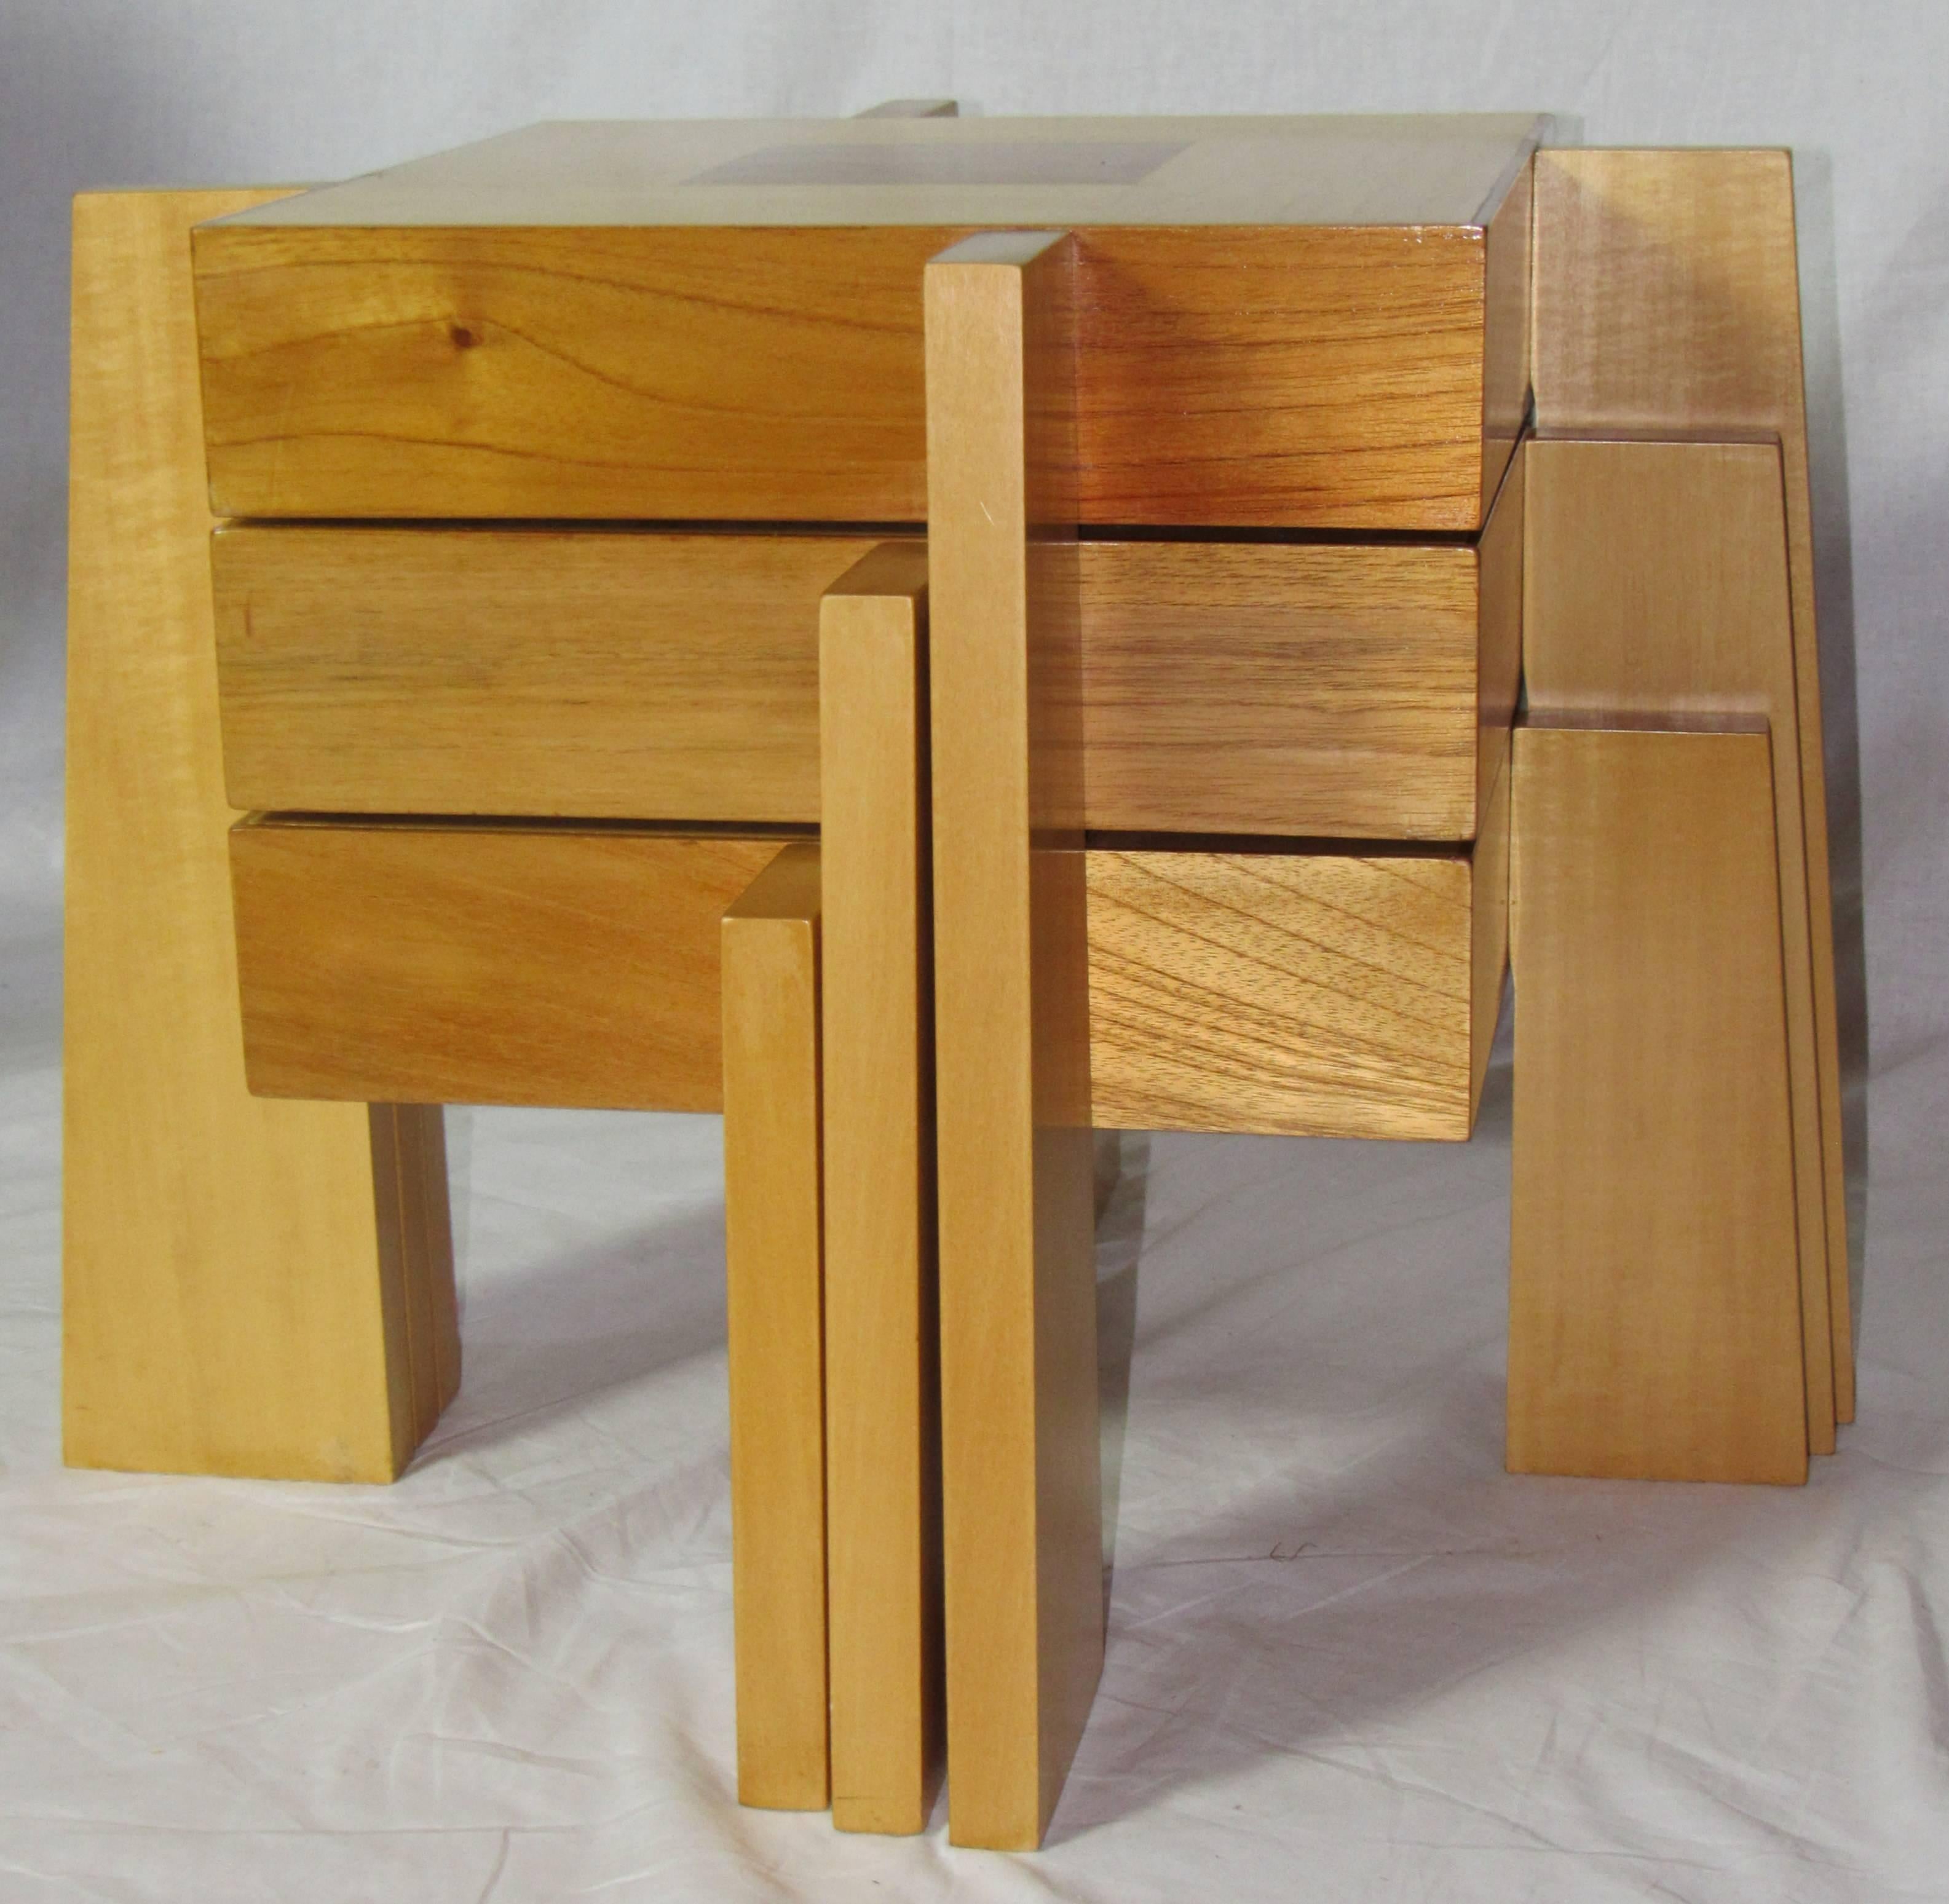 Lacquered Toqapu Studio Nest of Stacking Tables , circa 1985 For Sale